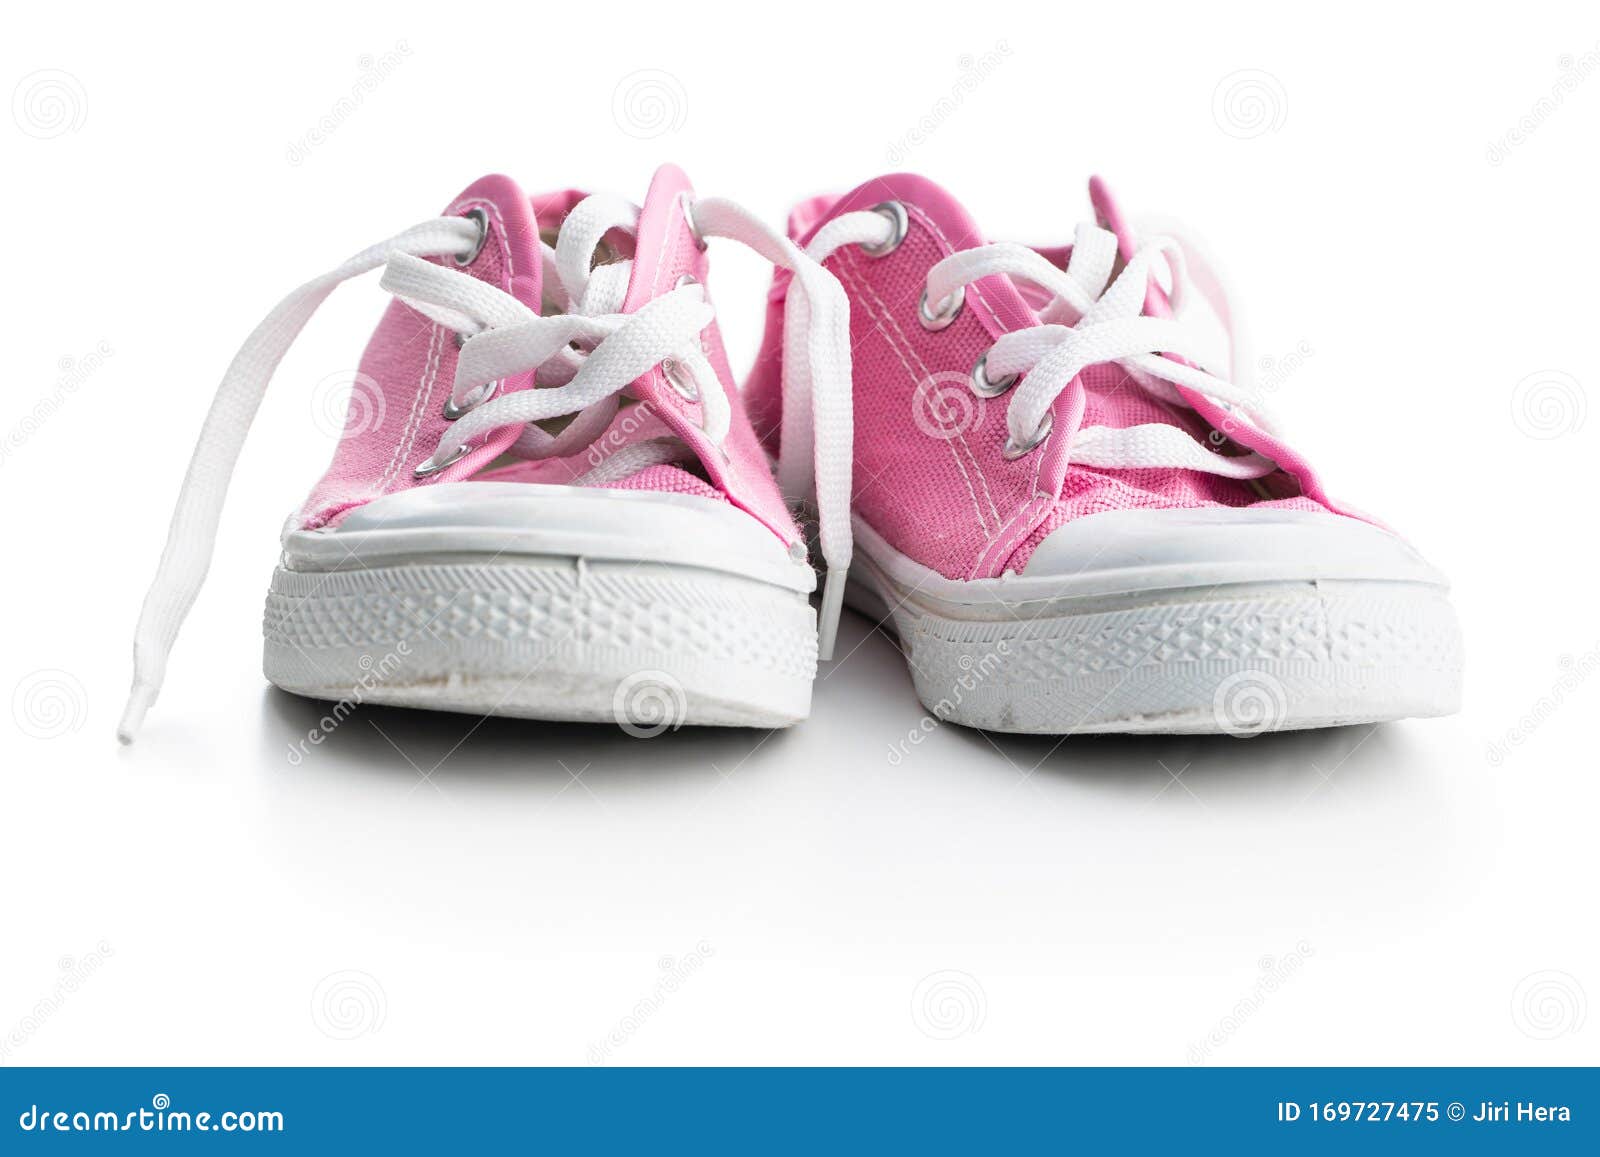 Retro Sneakers. Tennis Shoes Stock Image - Image of style, classic ...